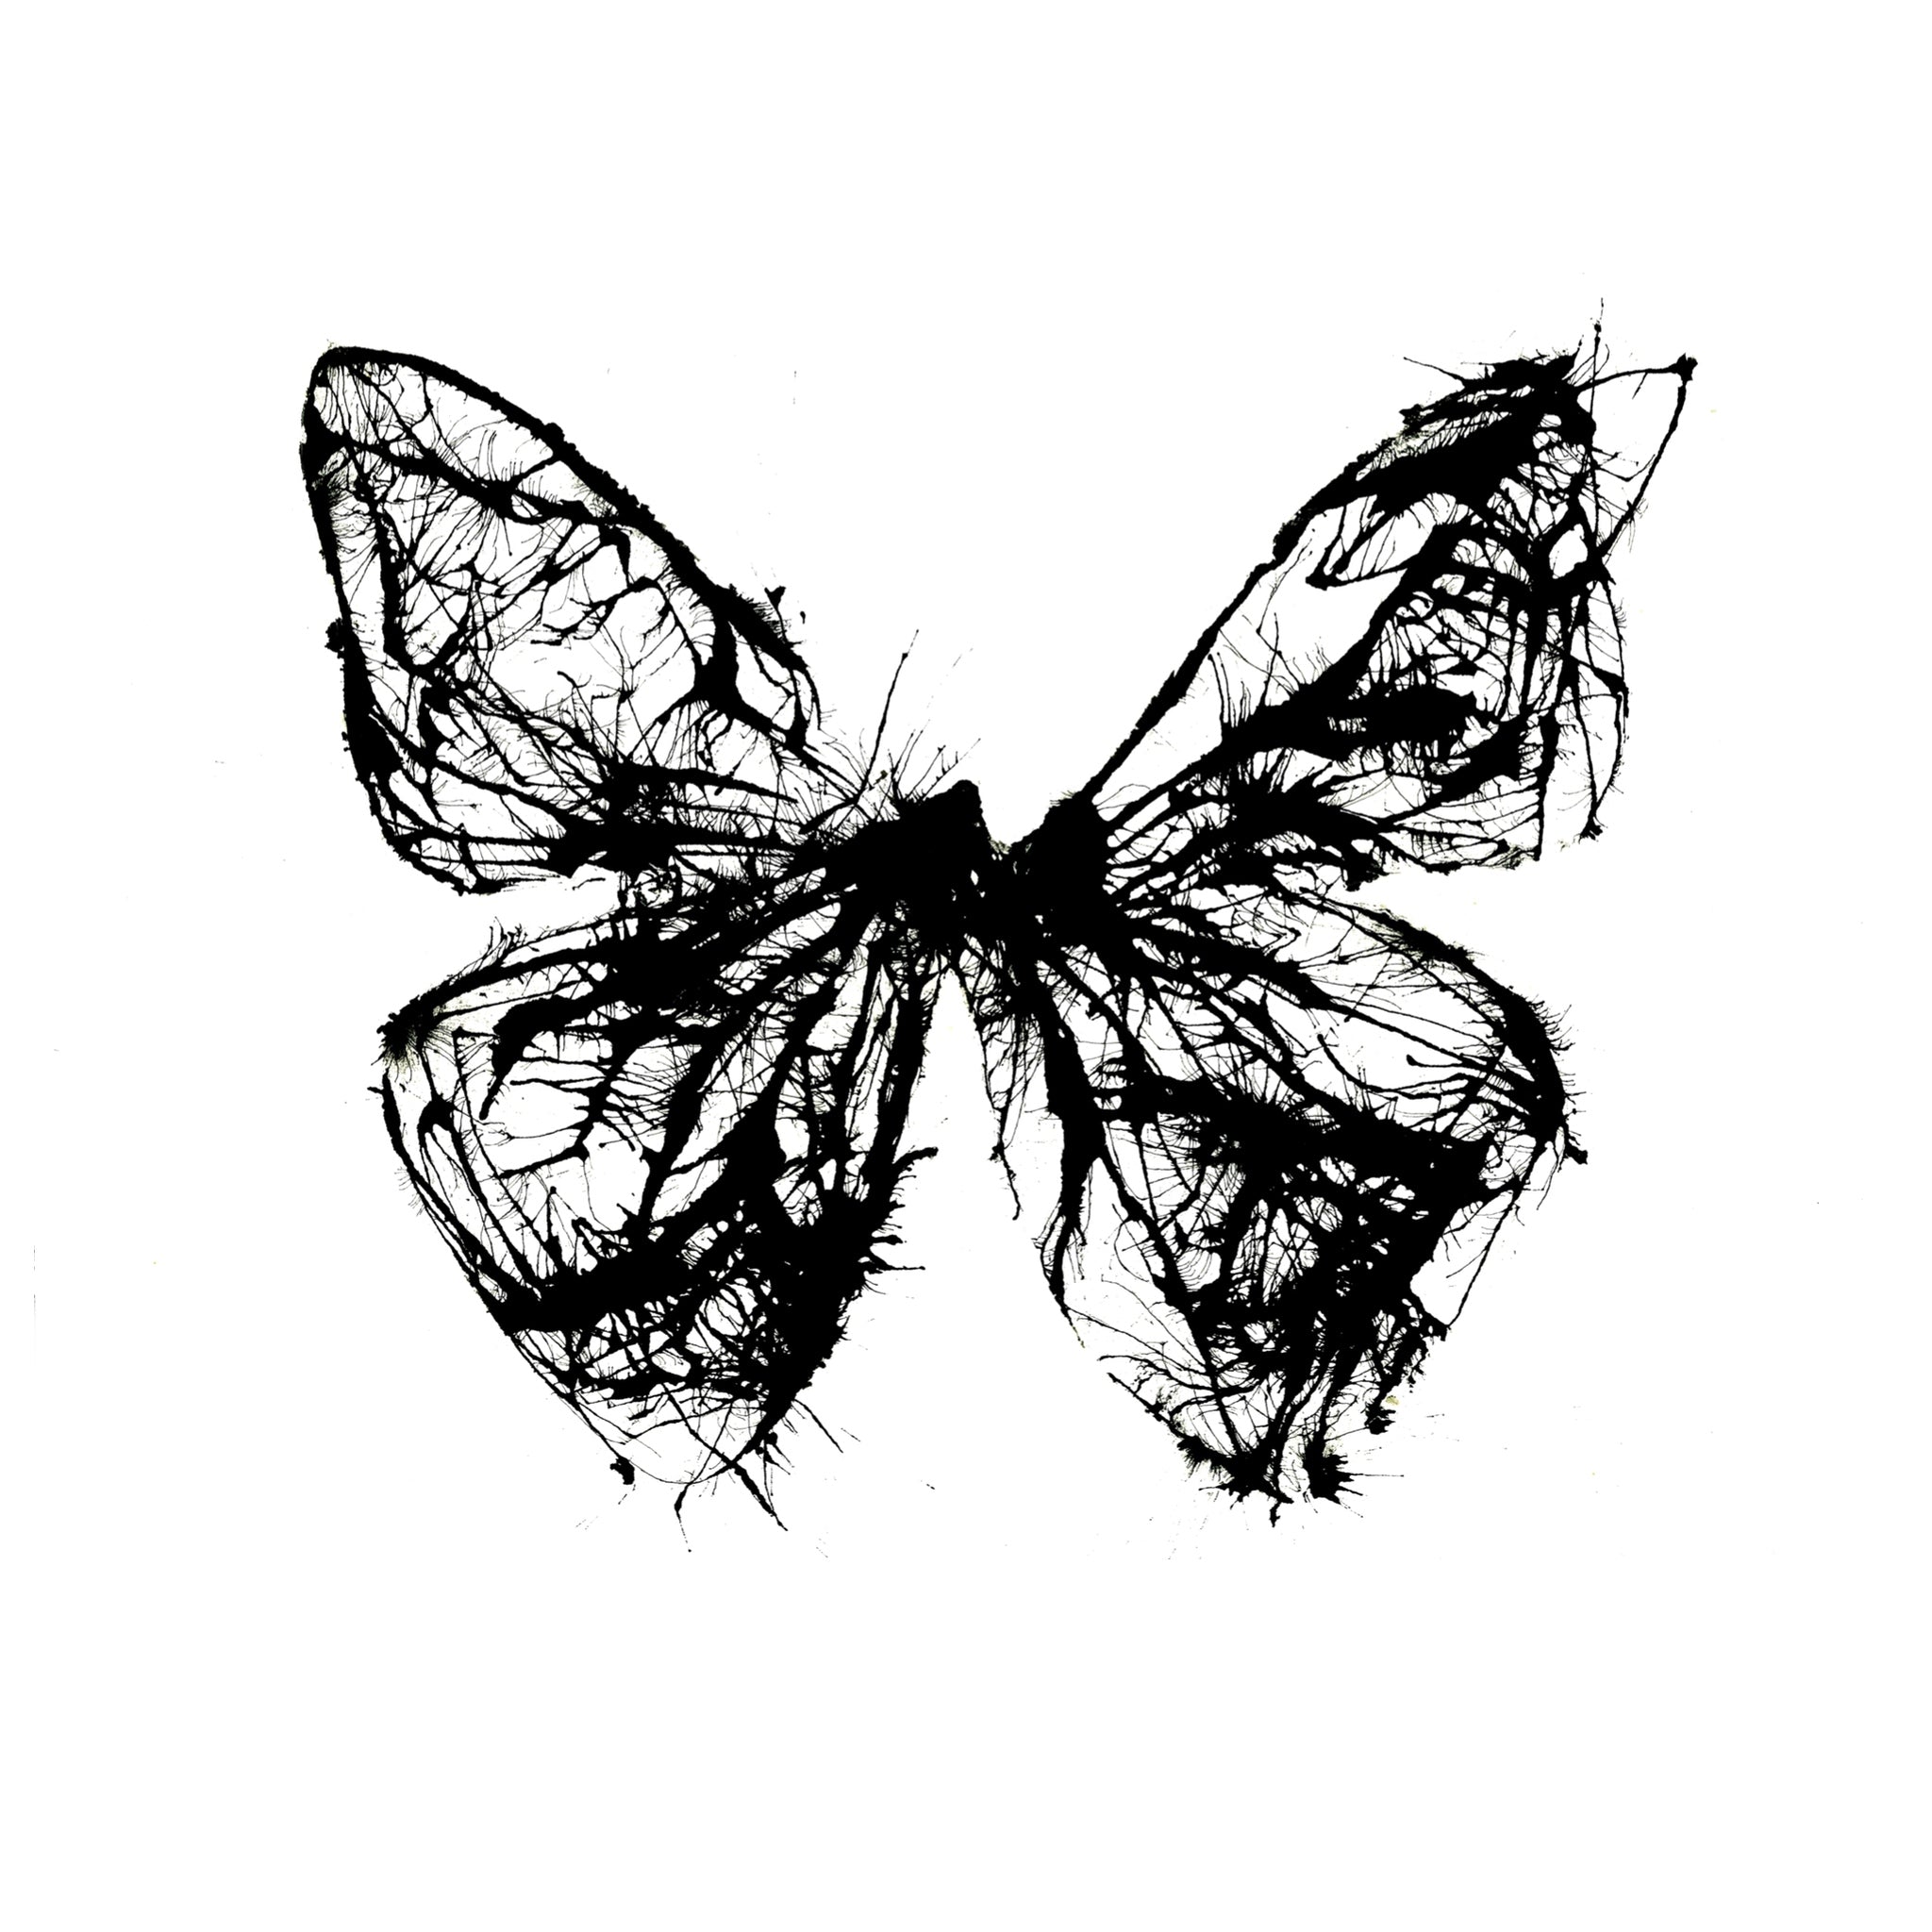 Black Butterfly  - Abstract Art Print